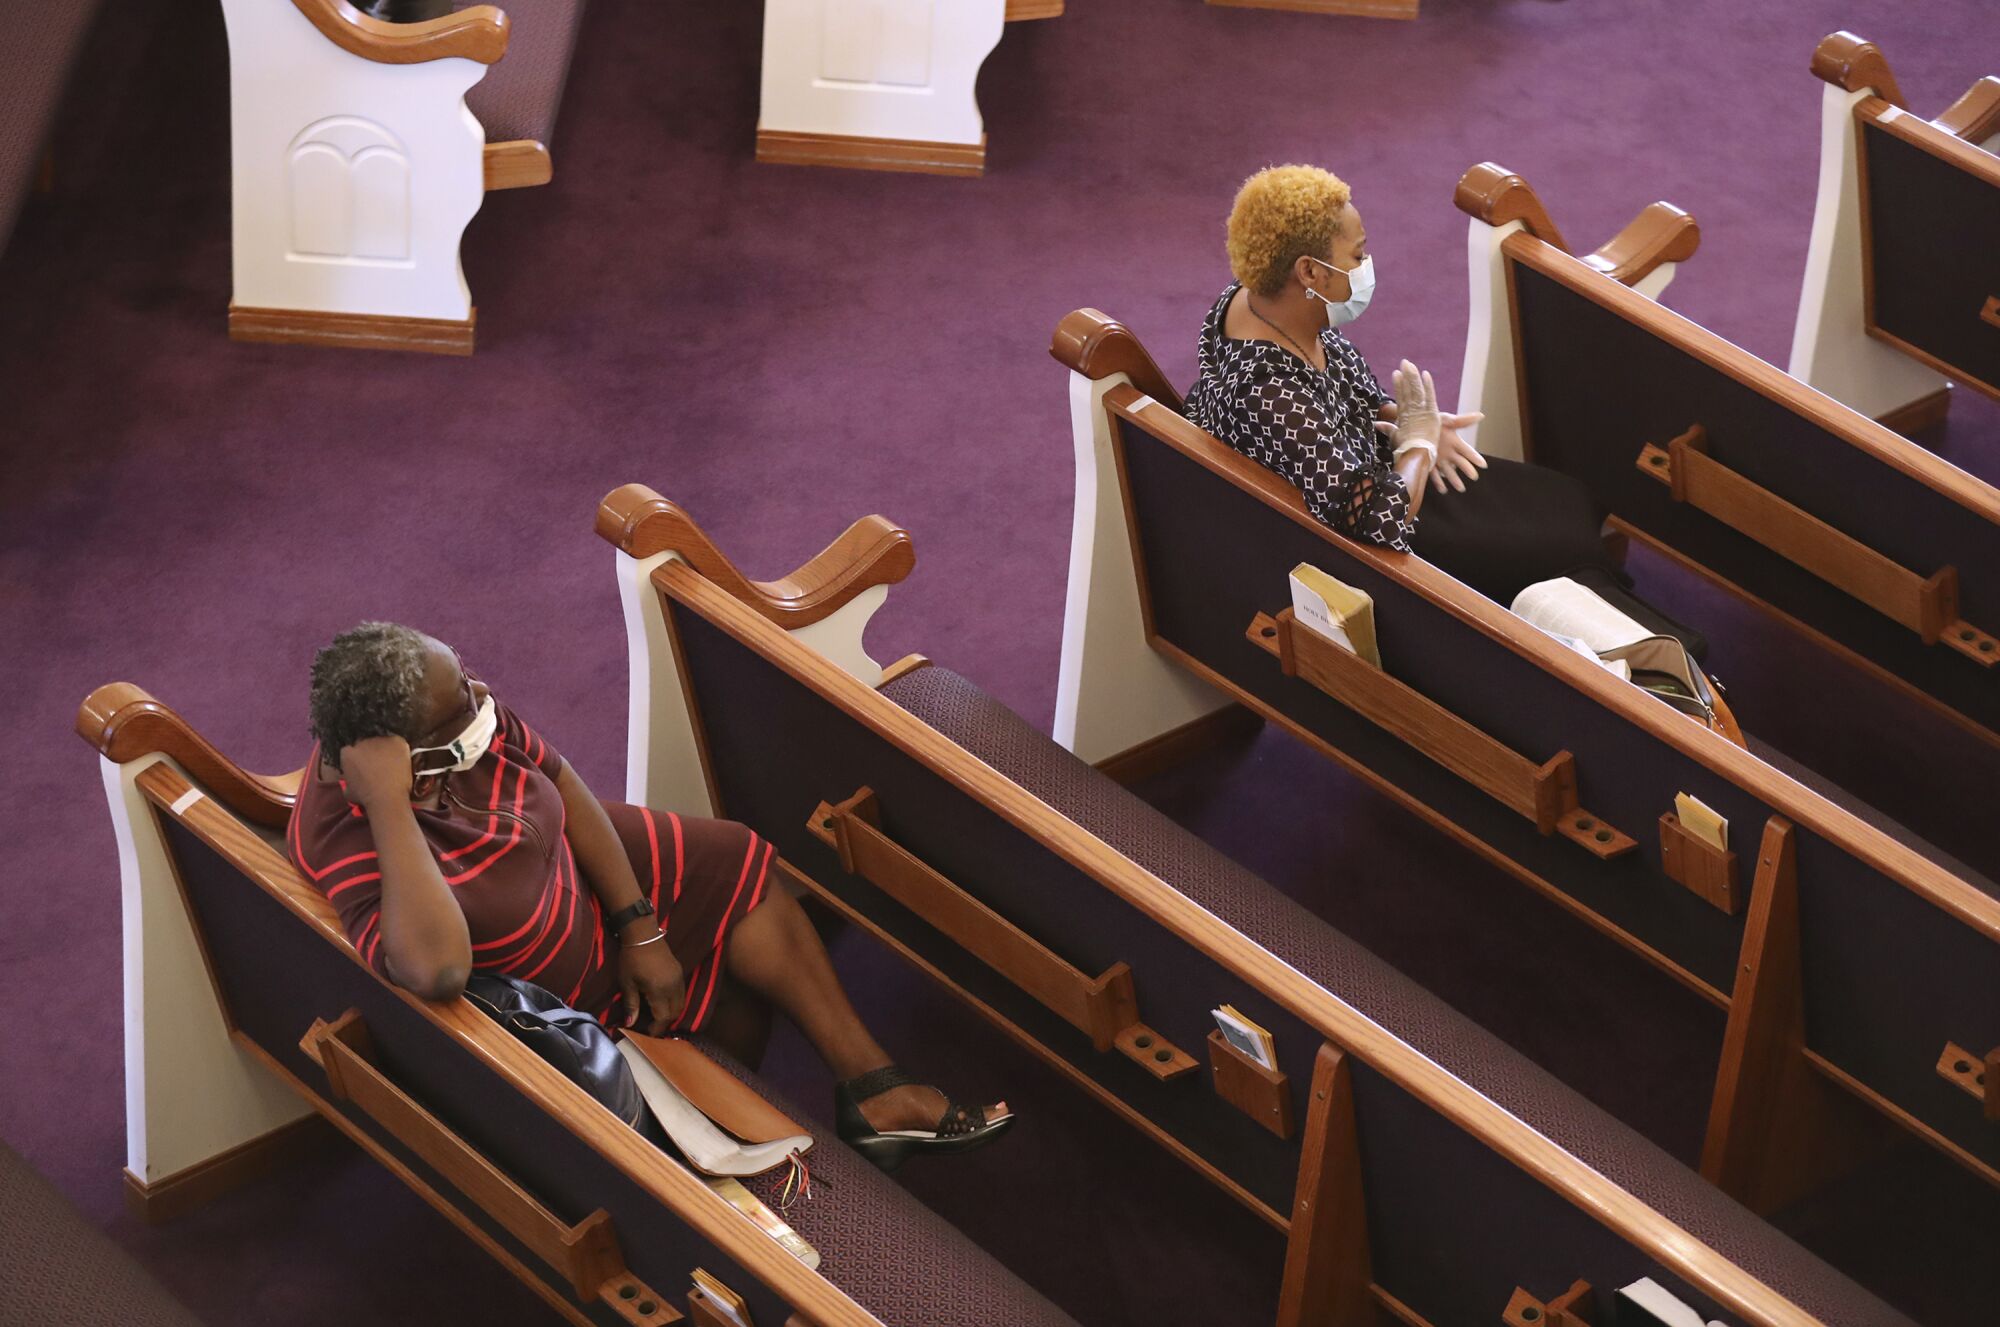 GEORGIA: Church members practice social distancing and wear masks while attending the Palm Sunday praise and worship service at Union Springs Baptist Church on Sunday in Rutledge, Ga.